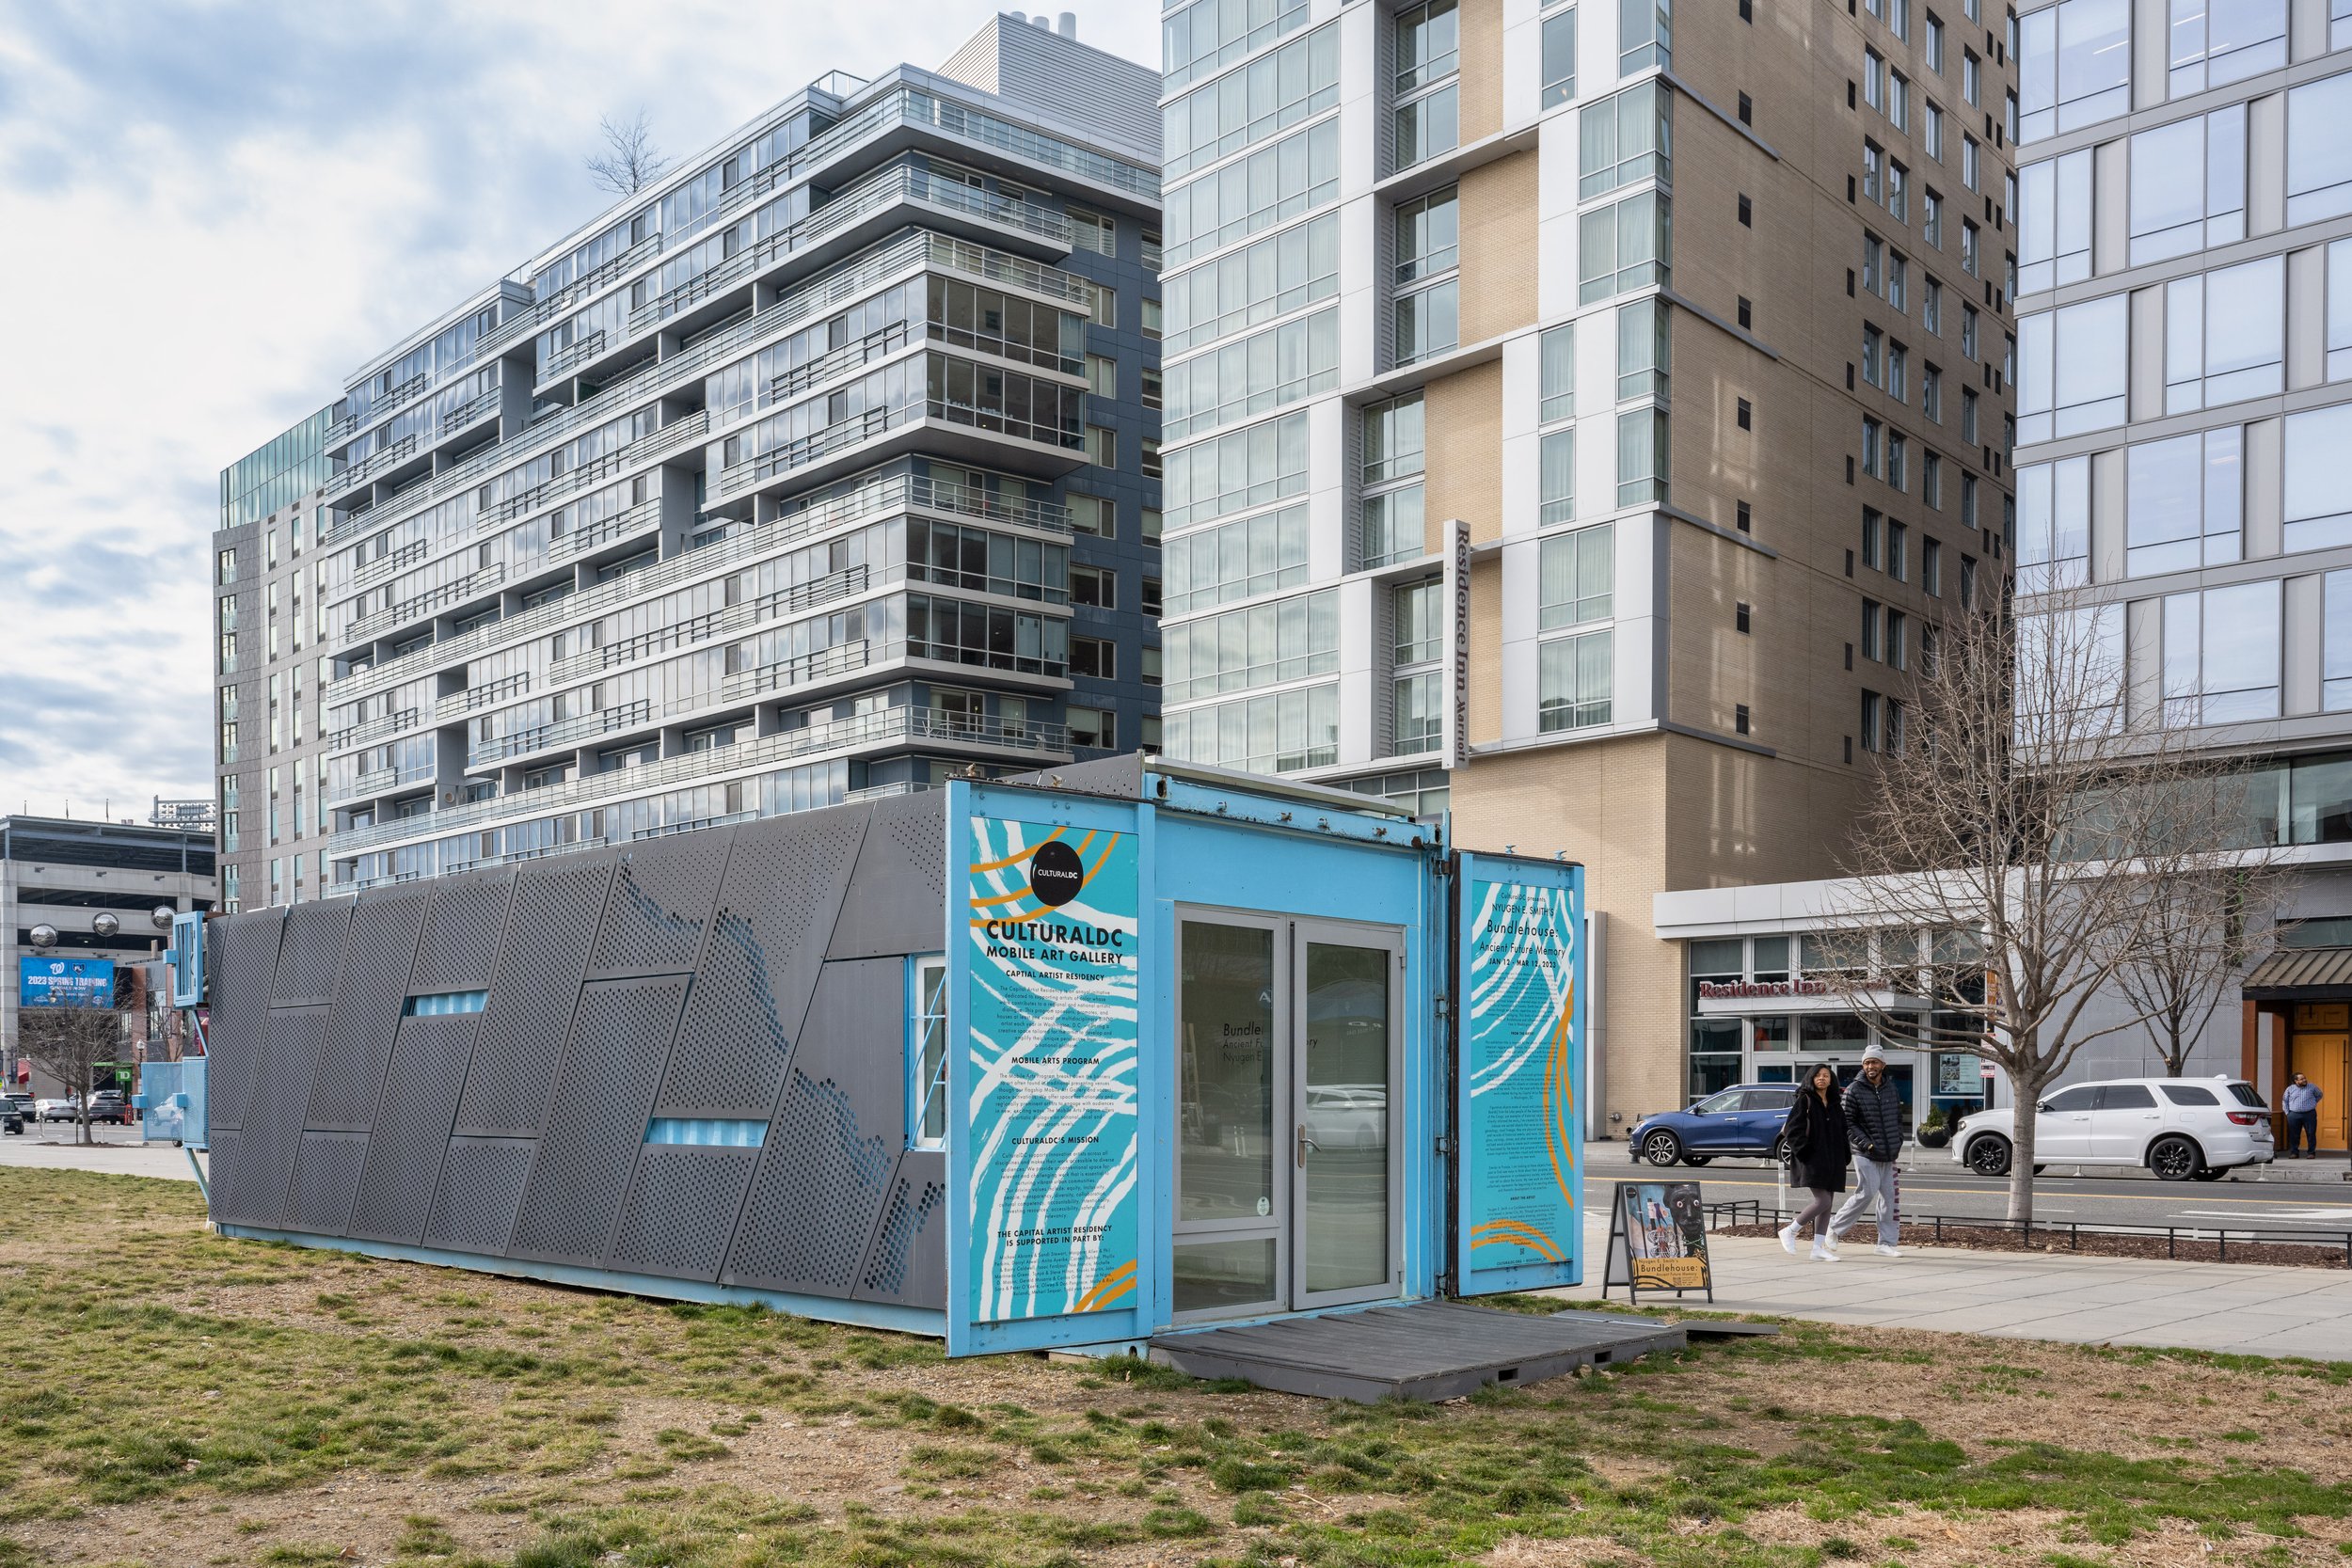 CulturalDC's Mobile Art Gallery at the Yards in the Capitol Riverfront Neighborhood